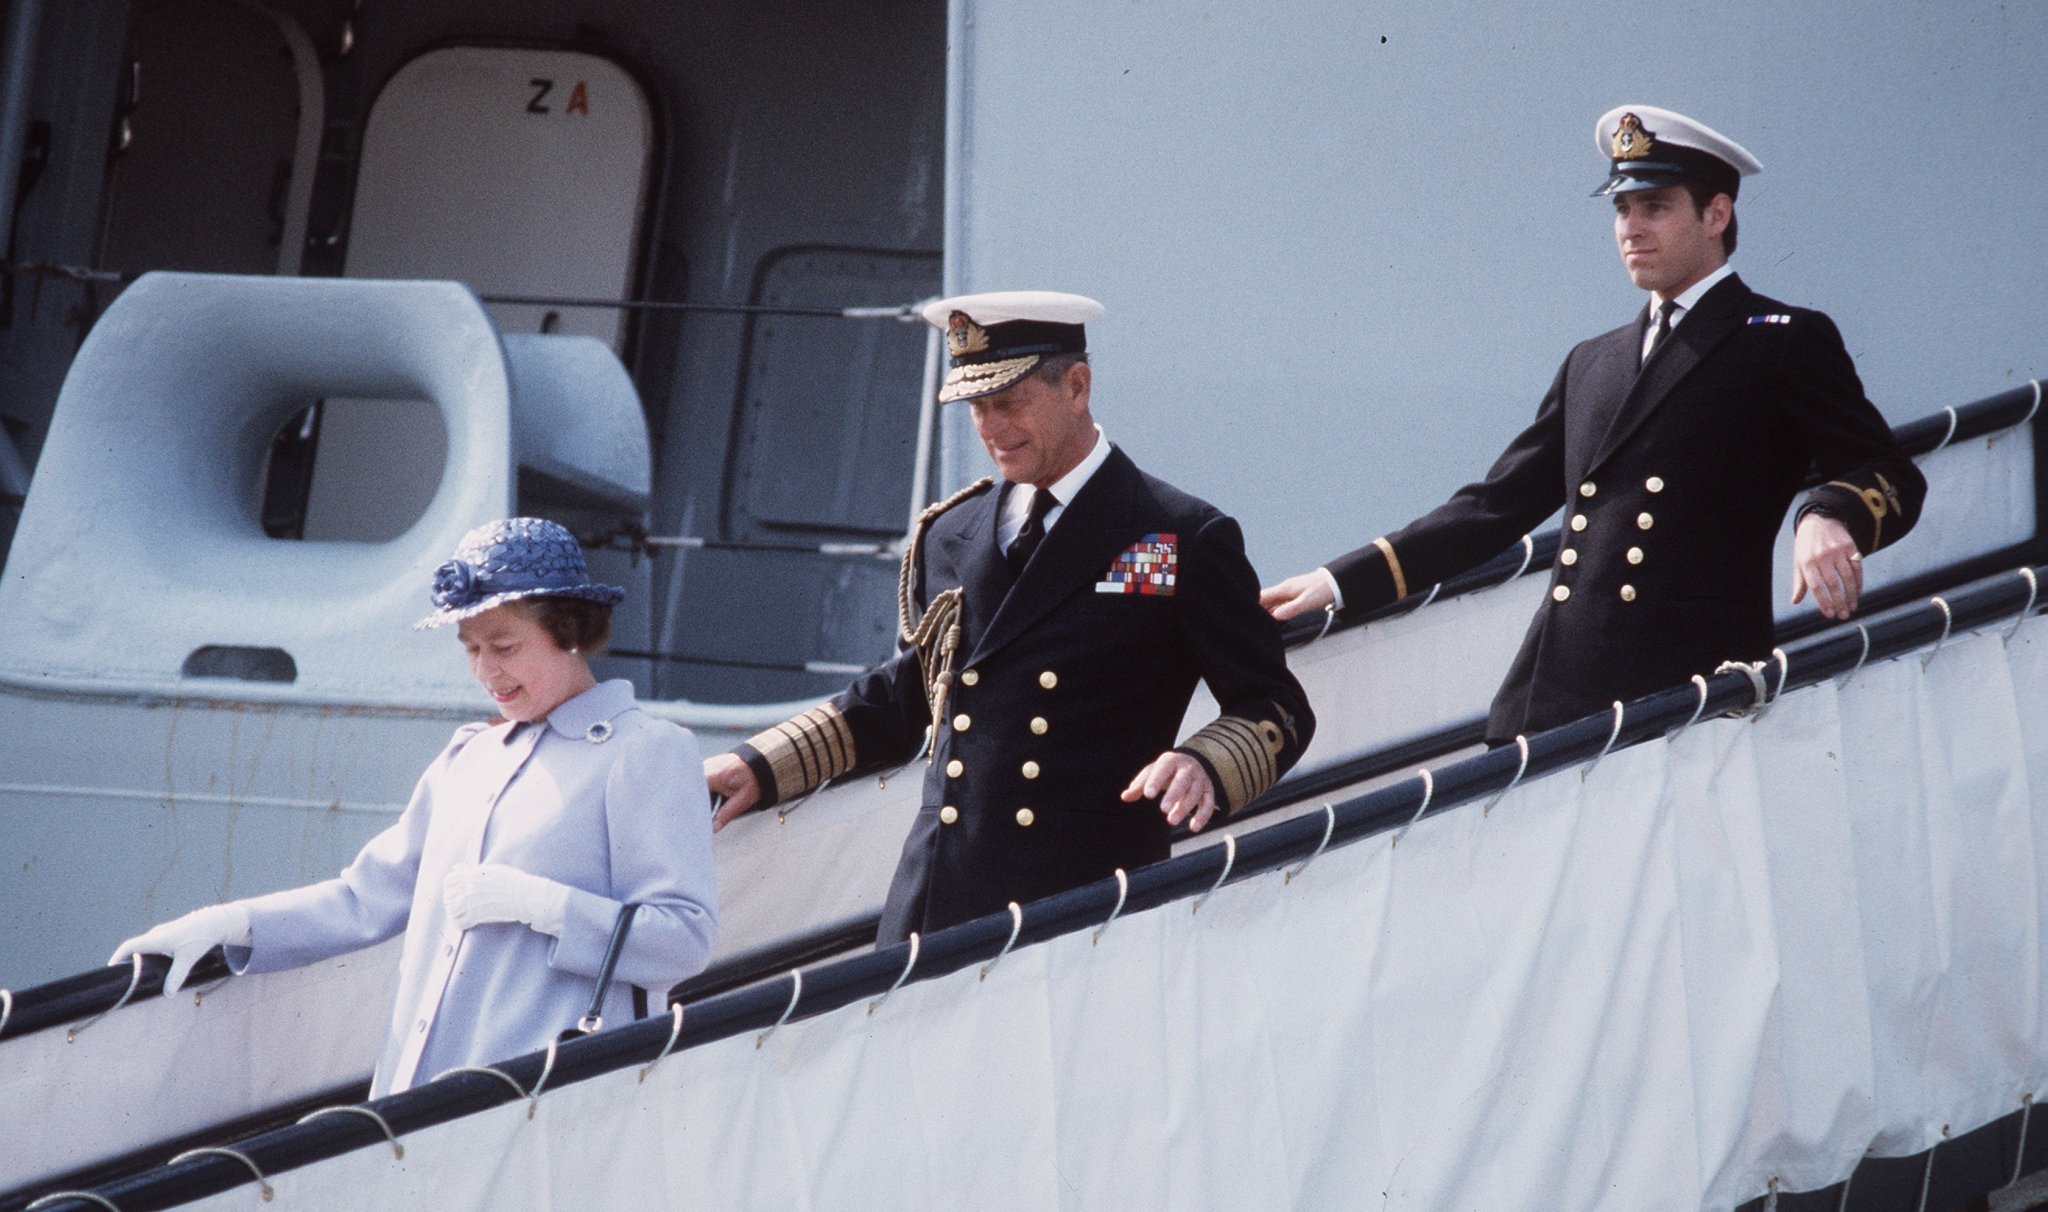 Prince Andrew disembarks HMS Invincible with his parents after serving in the Falklands War. Nuclear weapons were stored onboard. (Photo: Anwar Hussein / Getty)